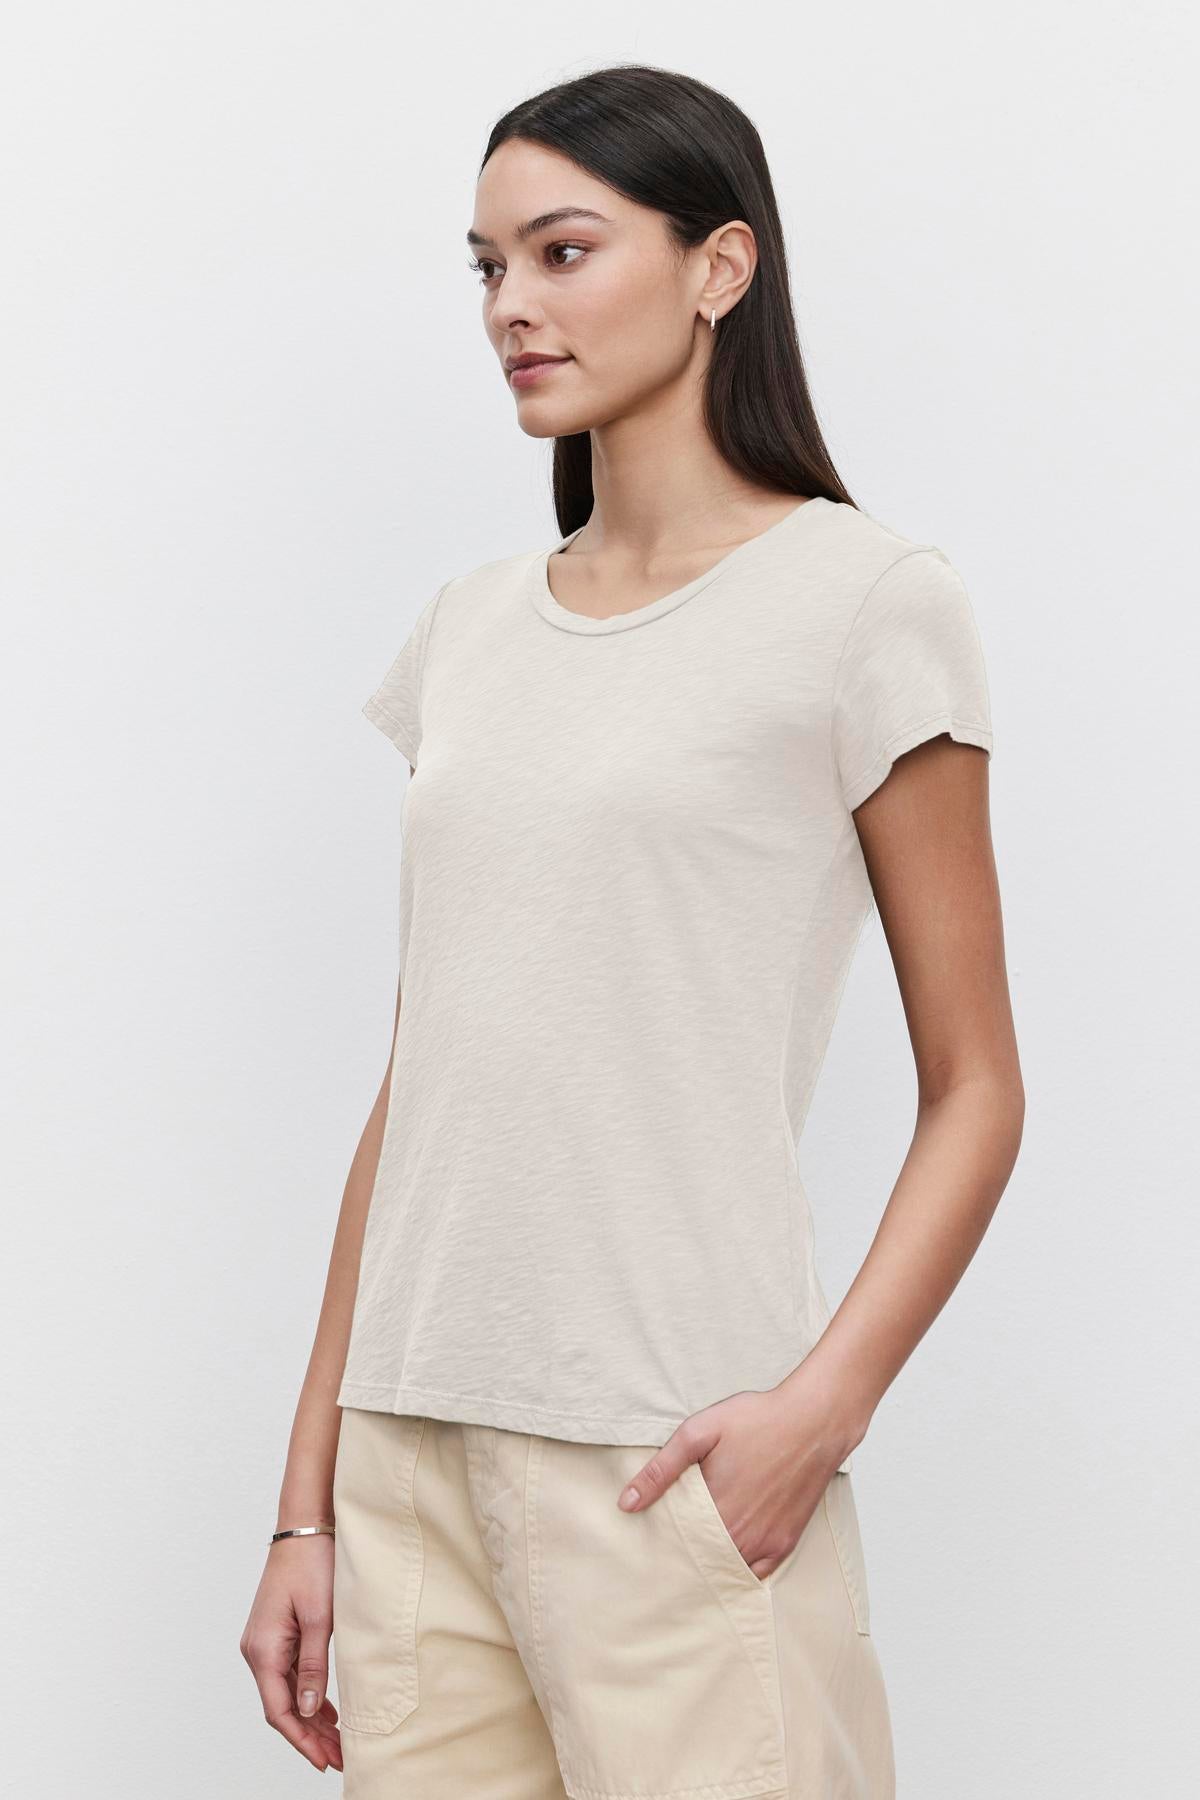 A woman with long dark hair is standing against a plain background, wearing a light beige ODELIA TEE made from premium cotton by Velvet by Graham & Spencer and light-colored pants, with her hand in her pocket.-37249868464321